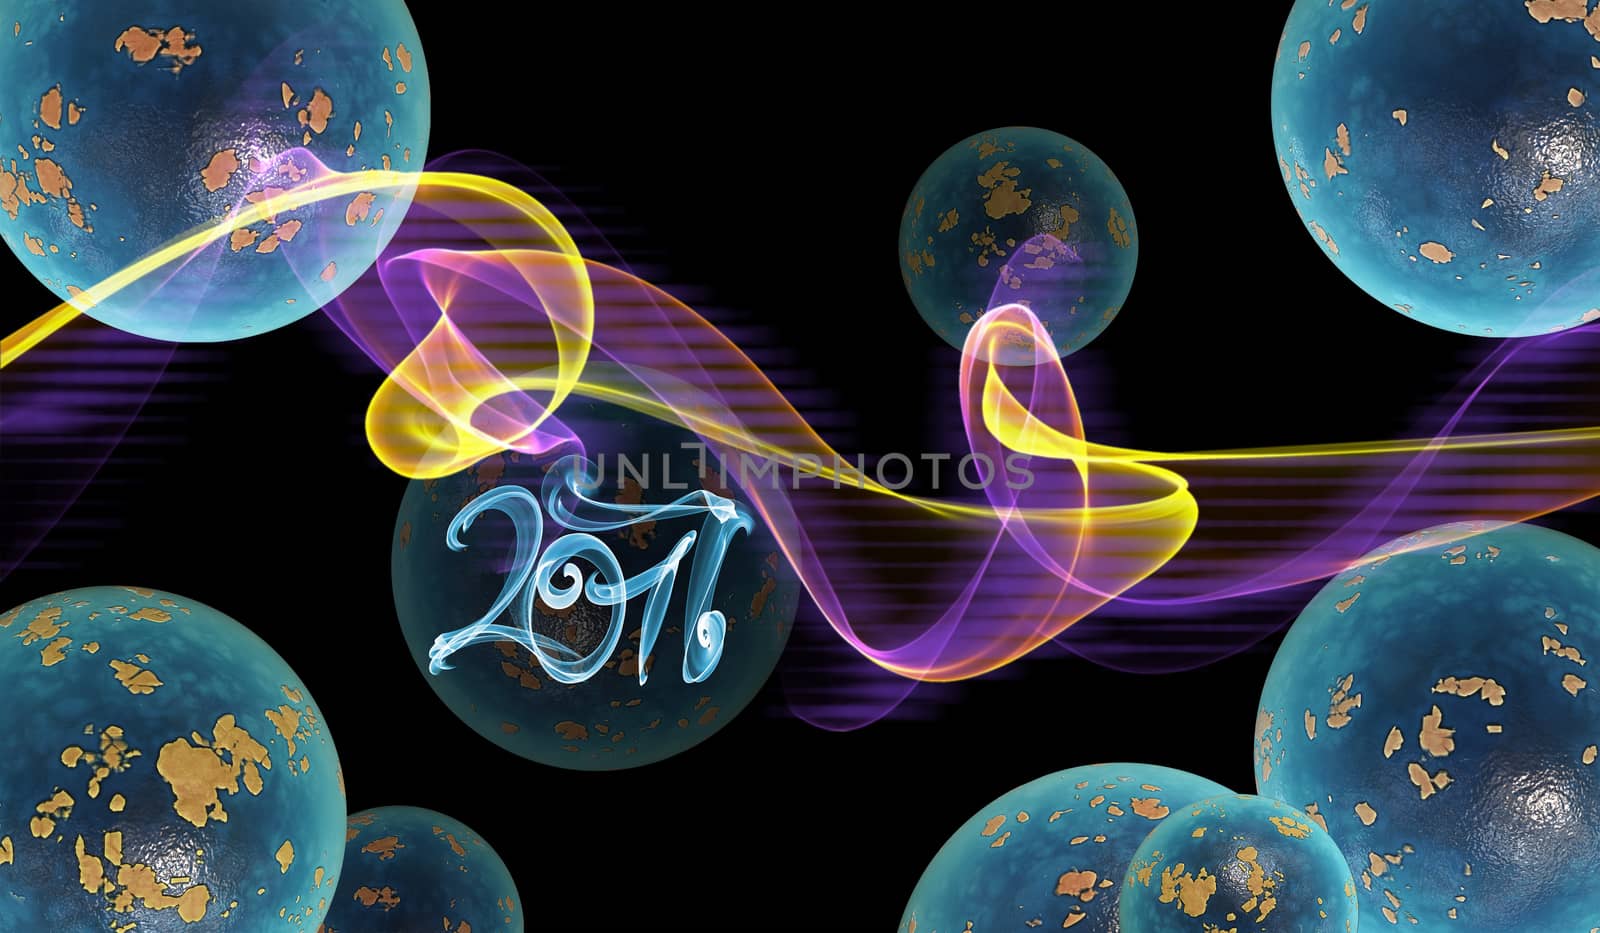 abstract colorful wavy smoke flame over black background full of planets and 2017 lettering written by blue smoke by skrotov